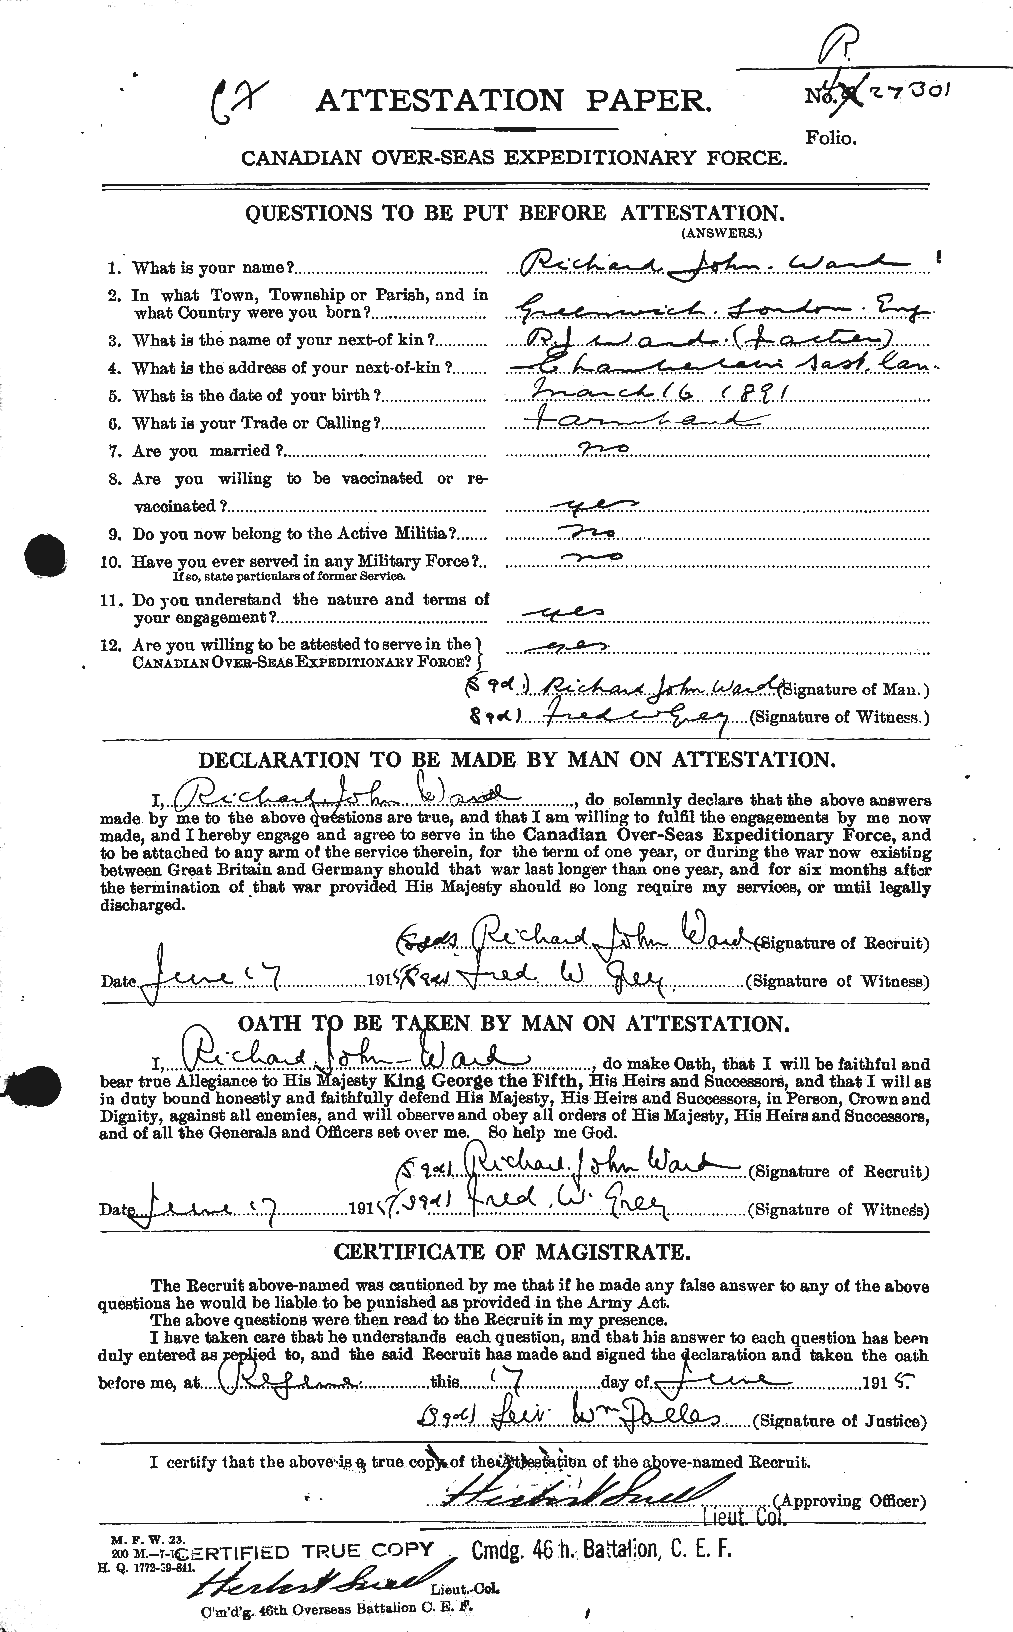 Personnel Records of the First World War - CEF 659654a